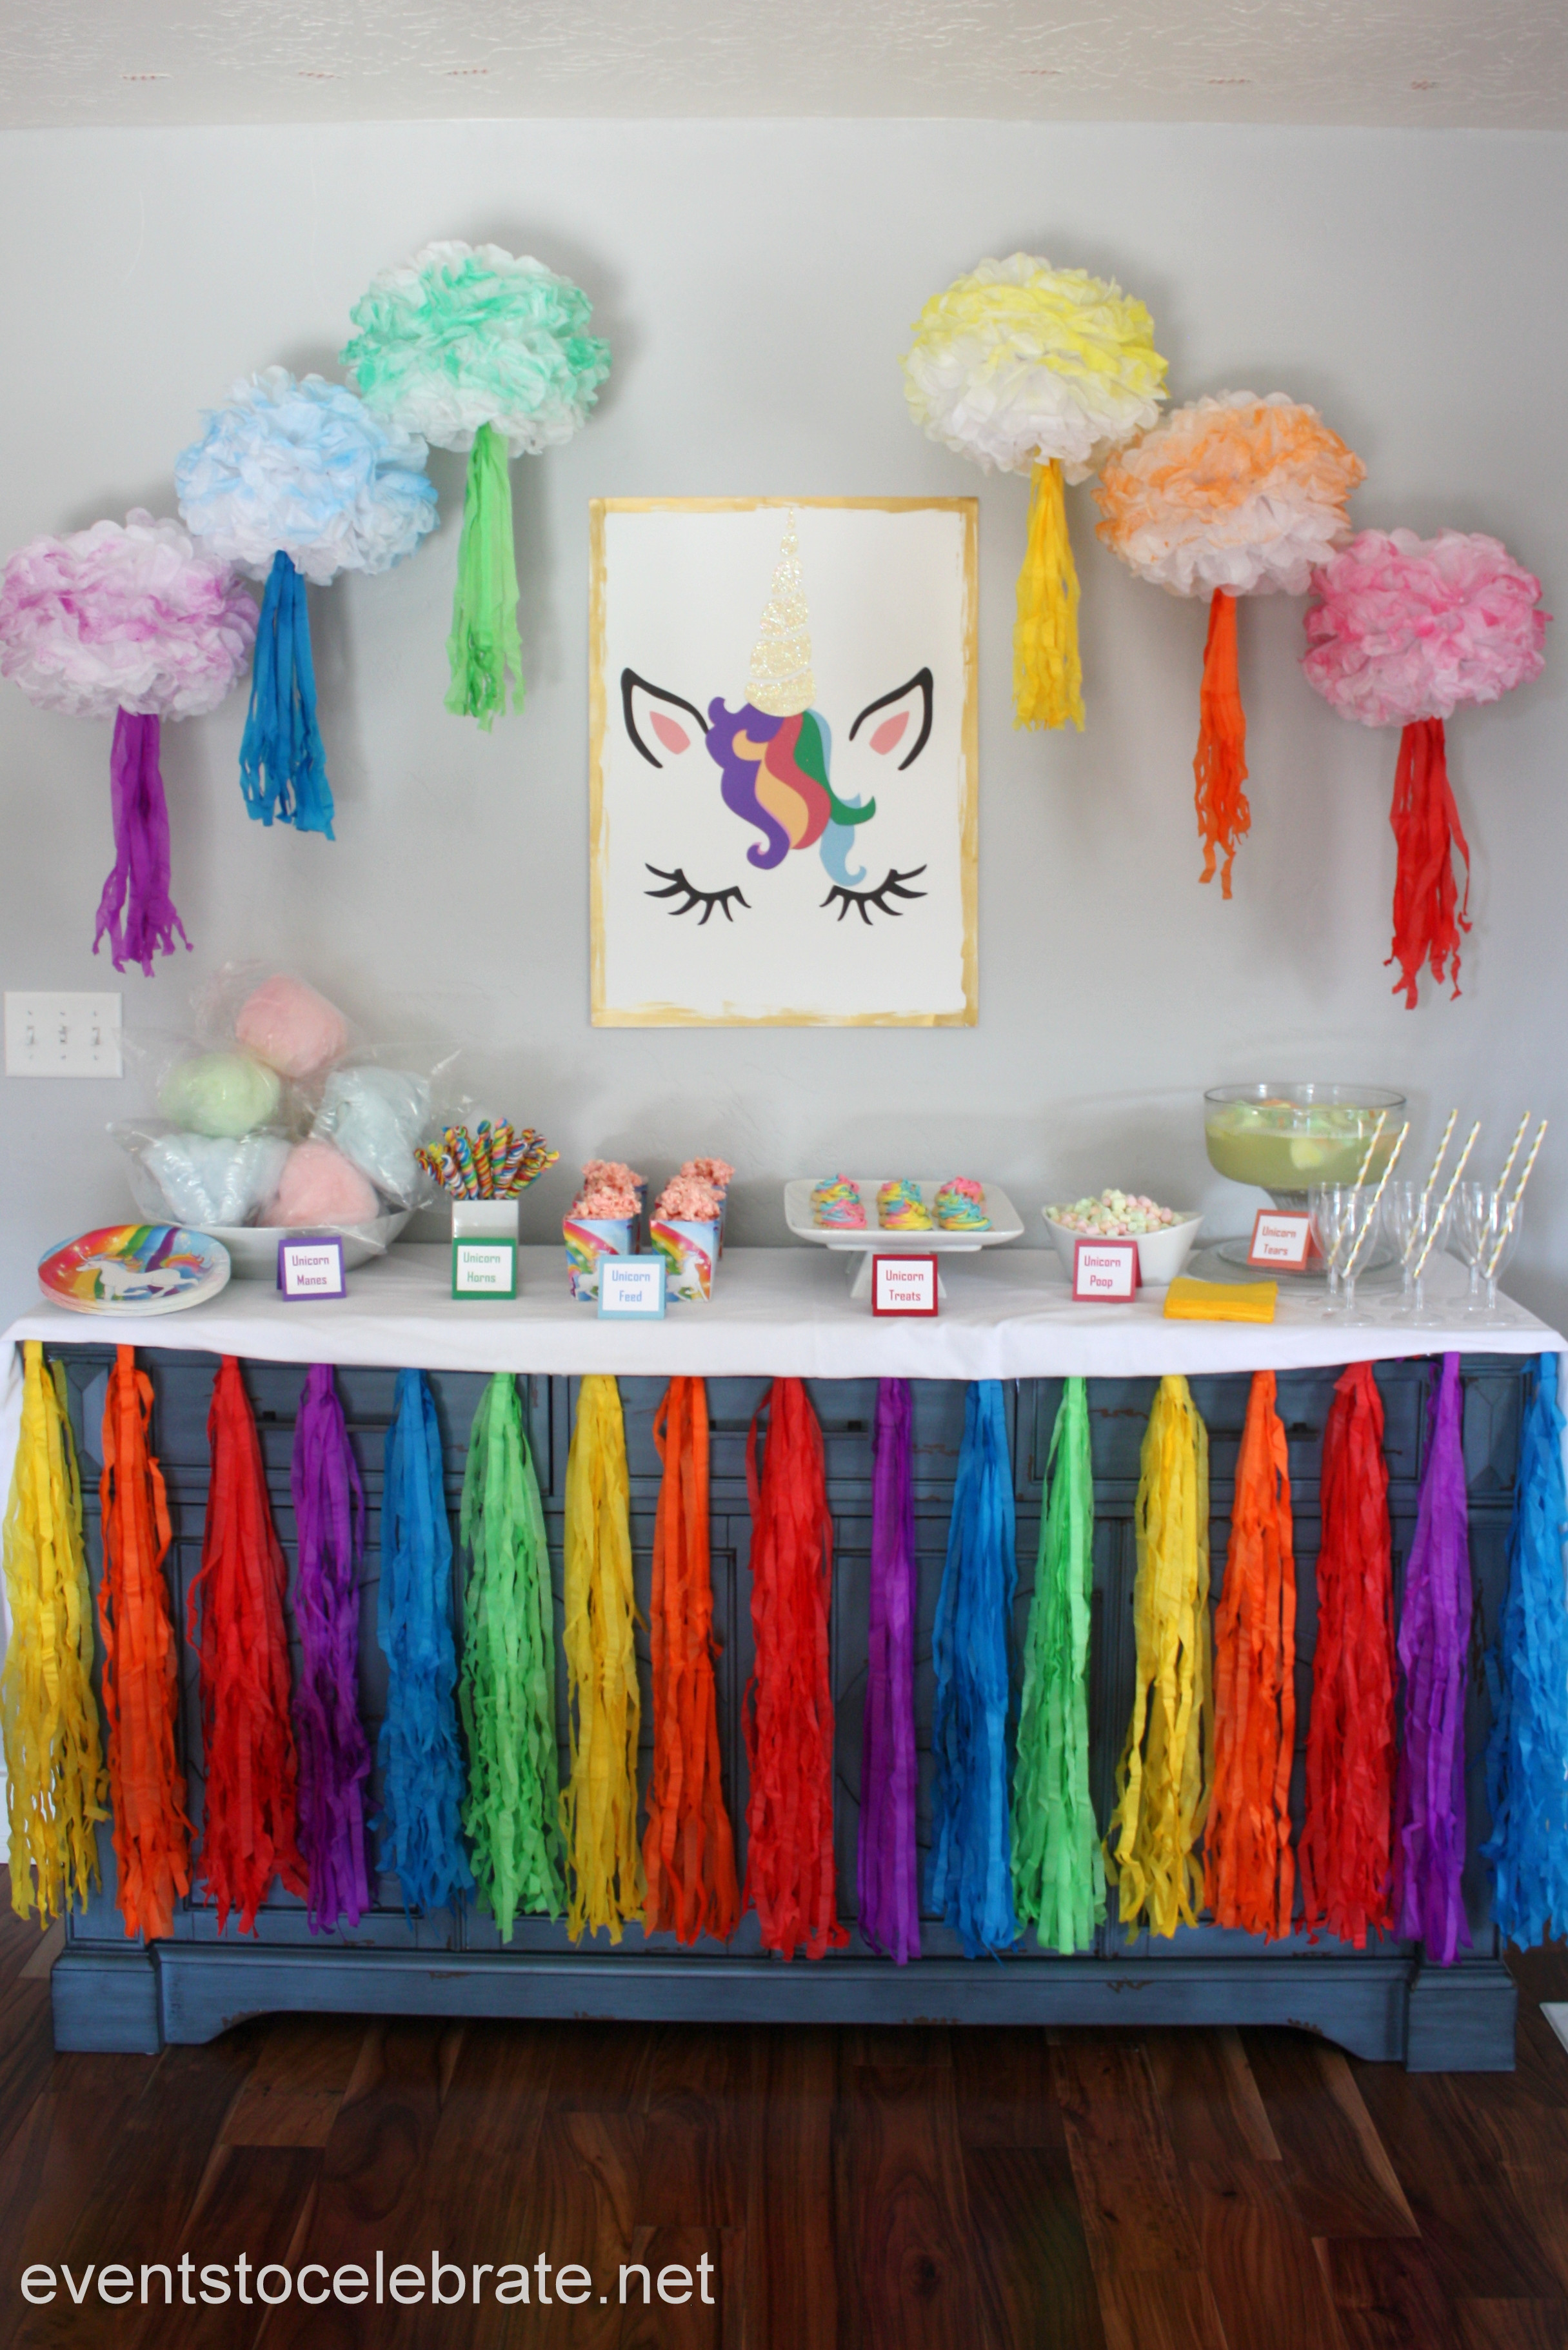 Unicorn Party Decorating Ideas
 Unicorn Party Decorations and Food events to CELEBRATE